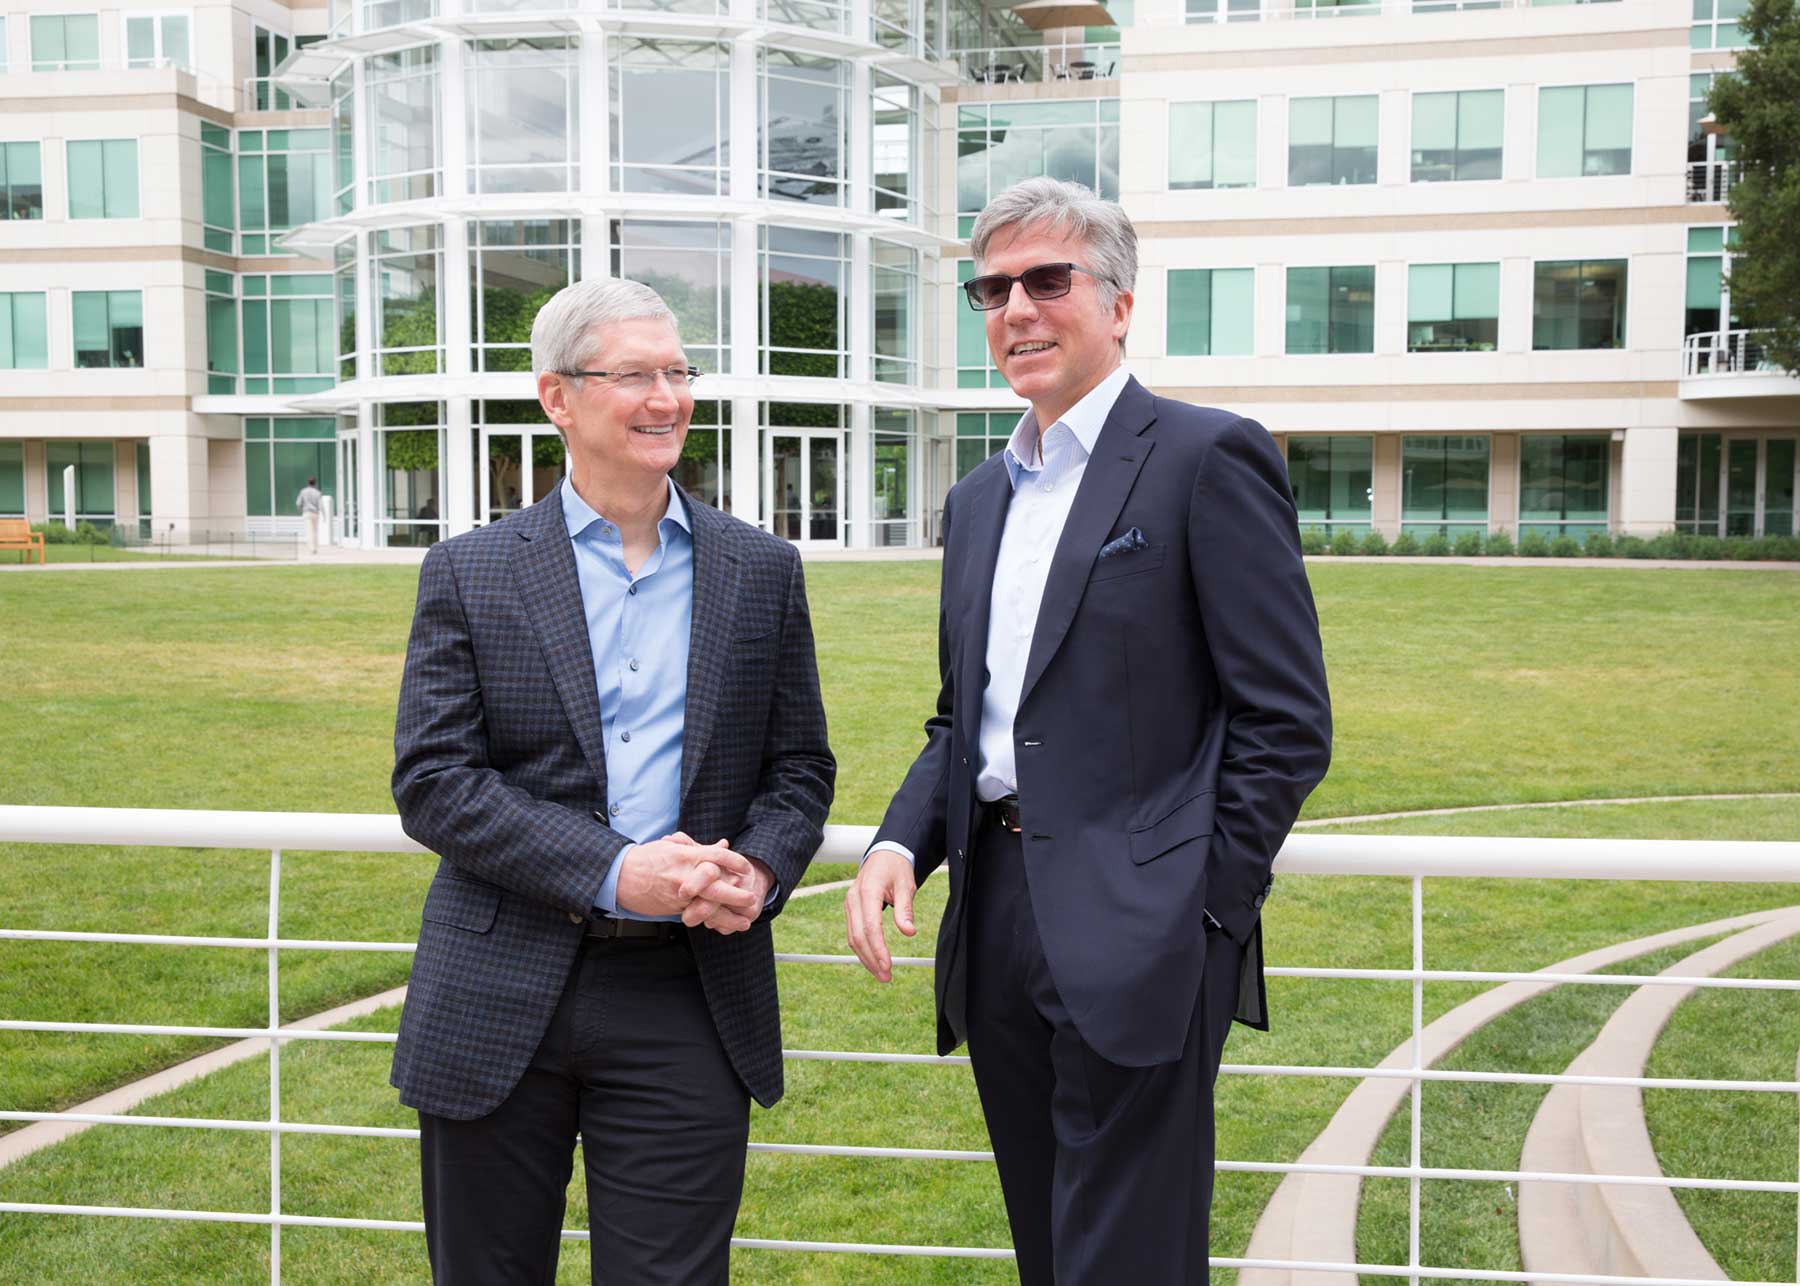 Apple CEO Tim Cook and SAP CEO Bill McDermott meet at Apple's campus in Cupertino to announce a new partnership to revolutionize work on iPhone and iPad. Courtesy of Apple/Roy Zipstein